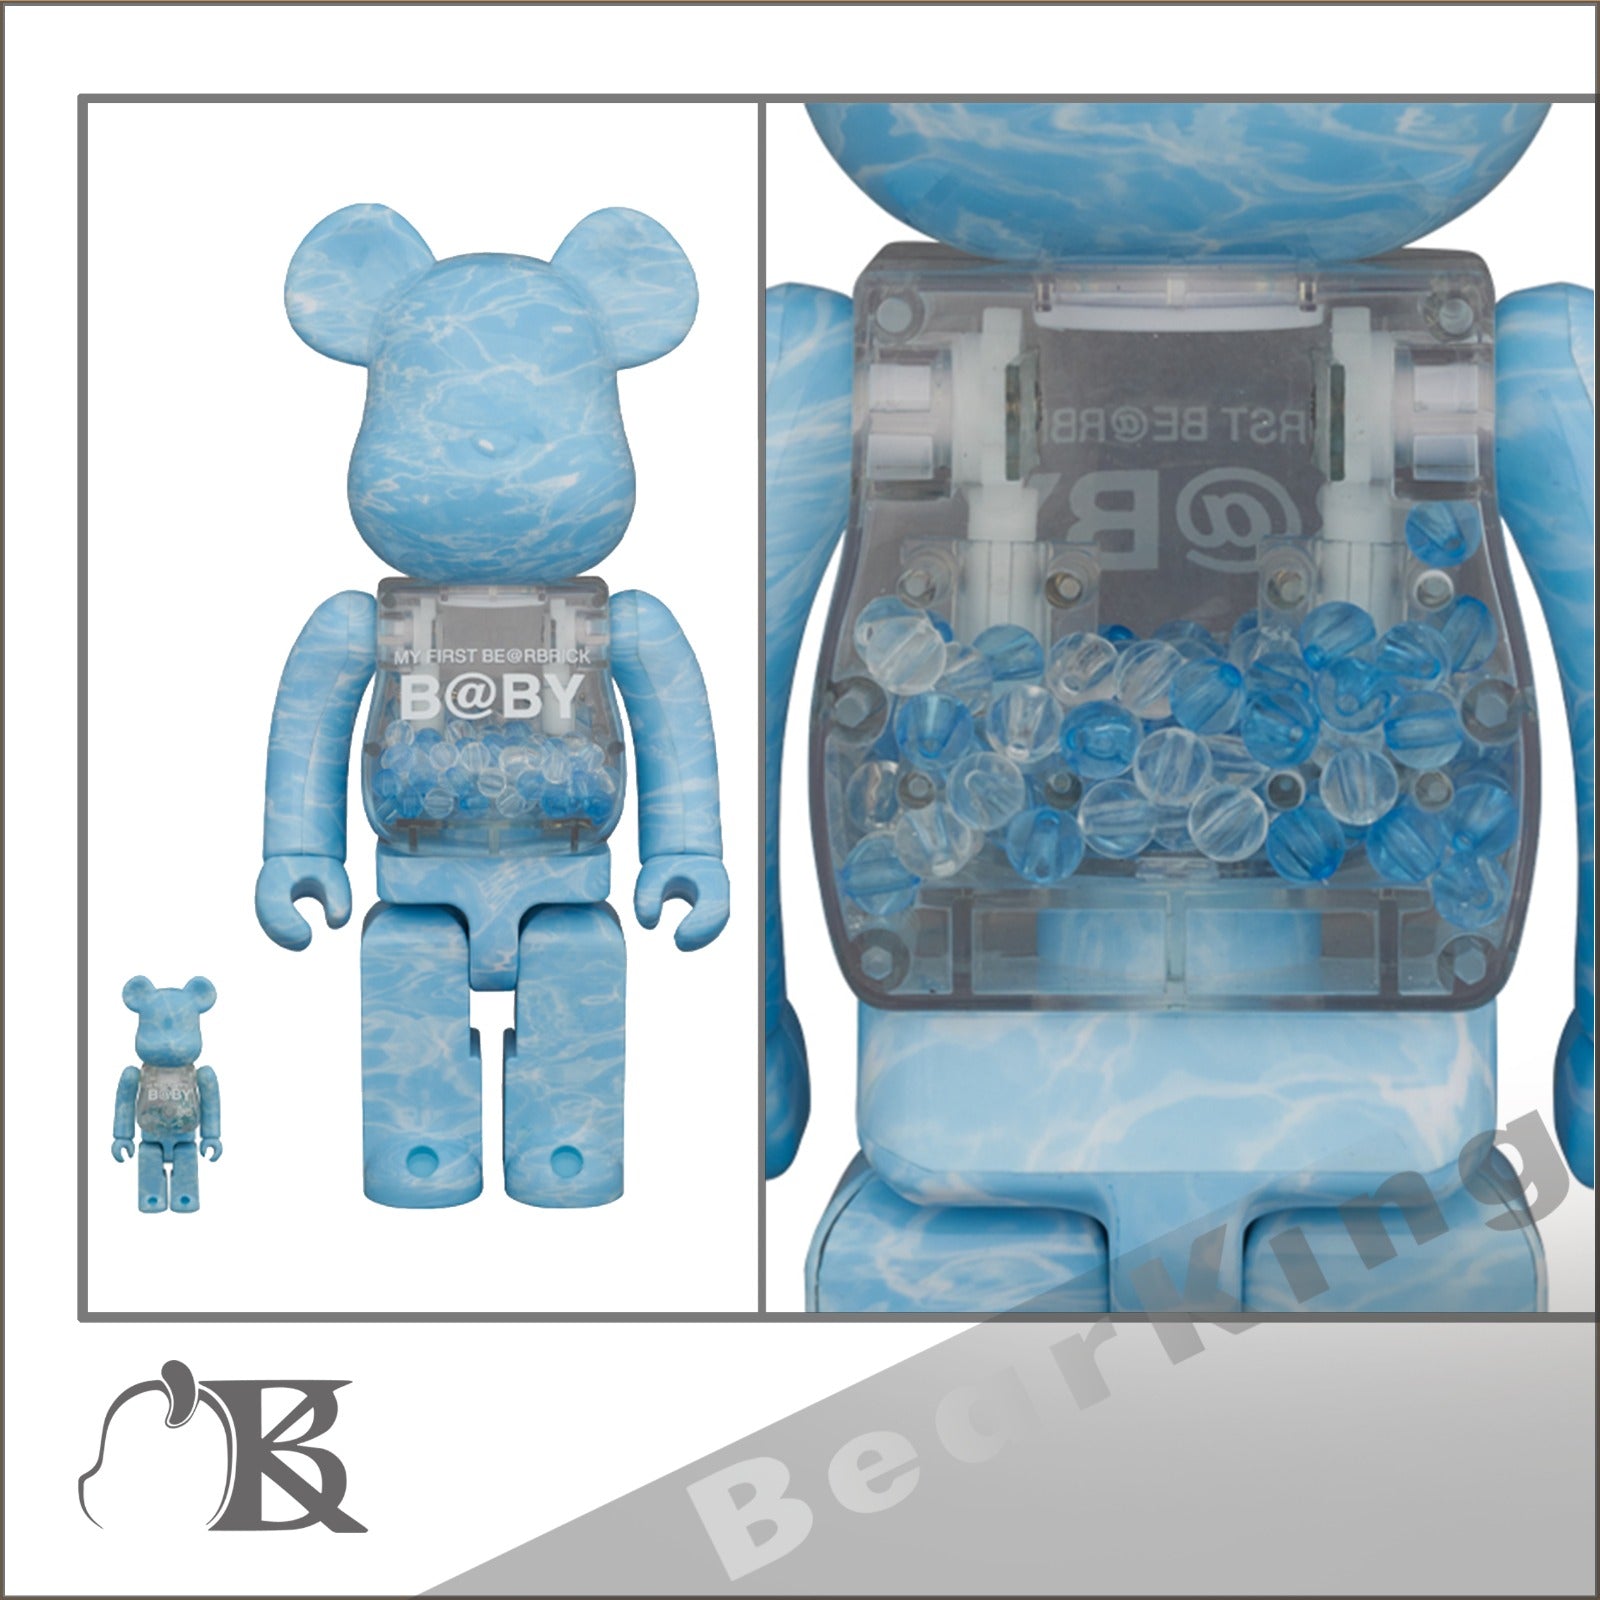 MY FIRST BE@RBRICK B@BY WATER CREST Ver. 100％ & 400％ 千秋 baby 水波